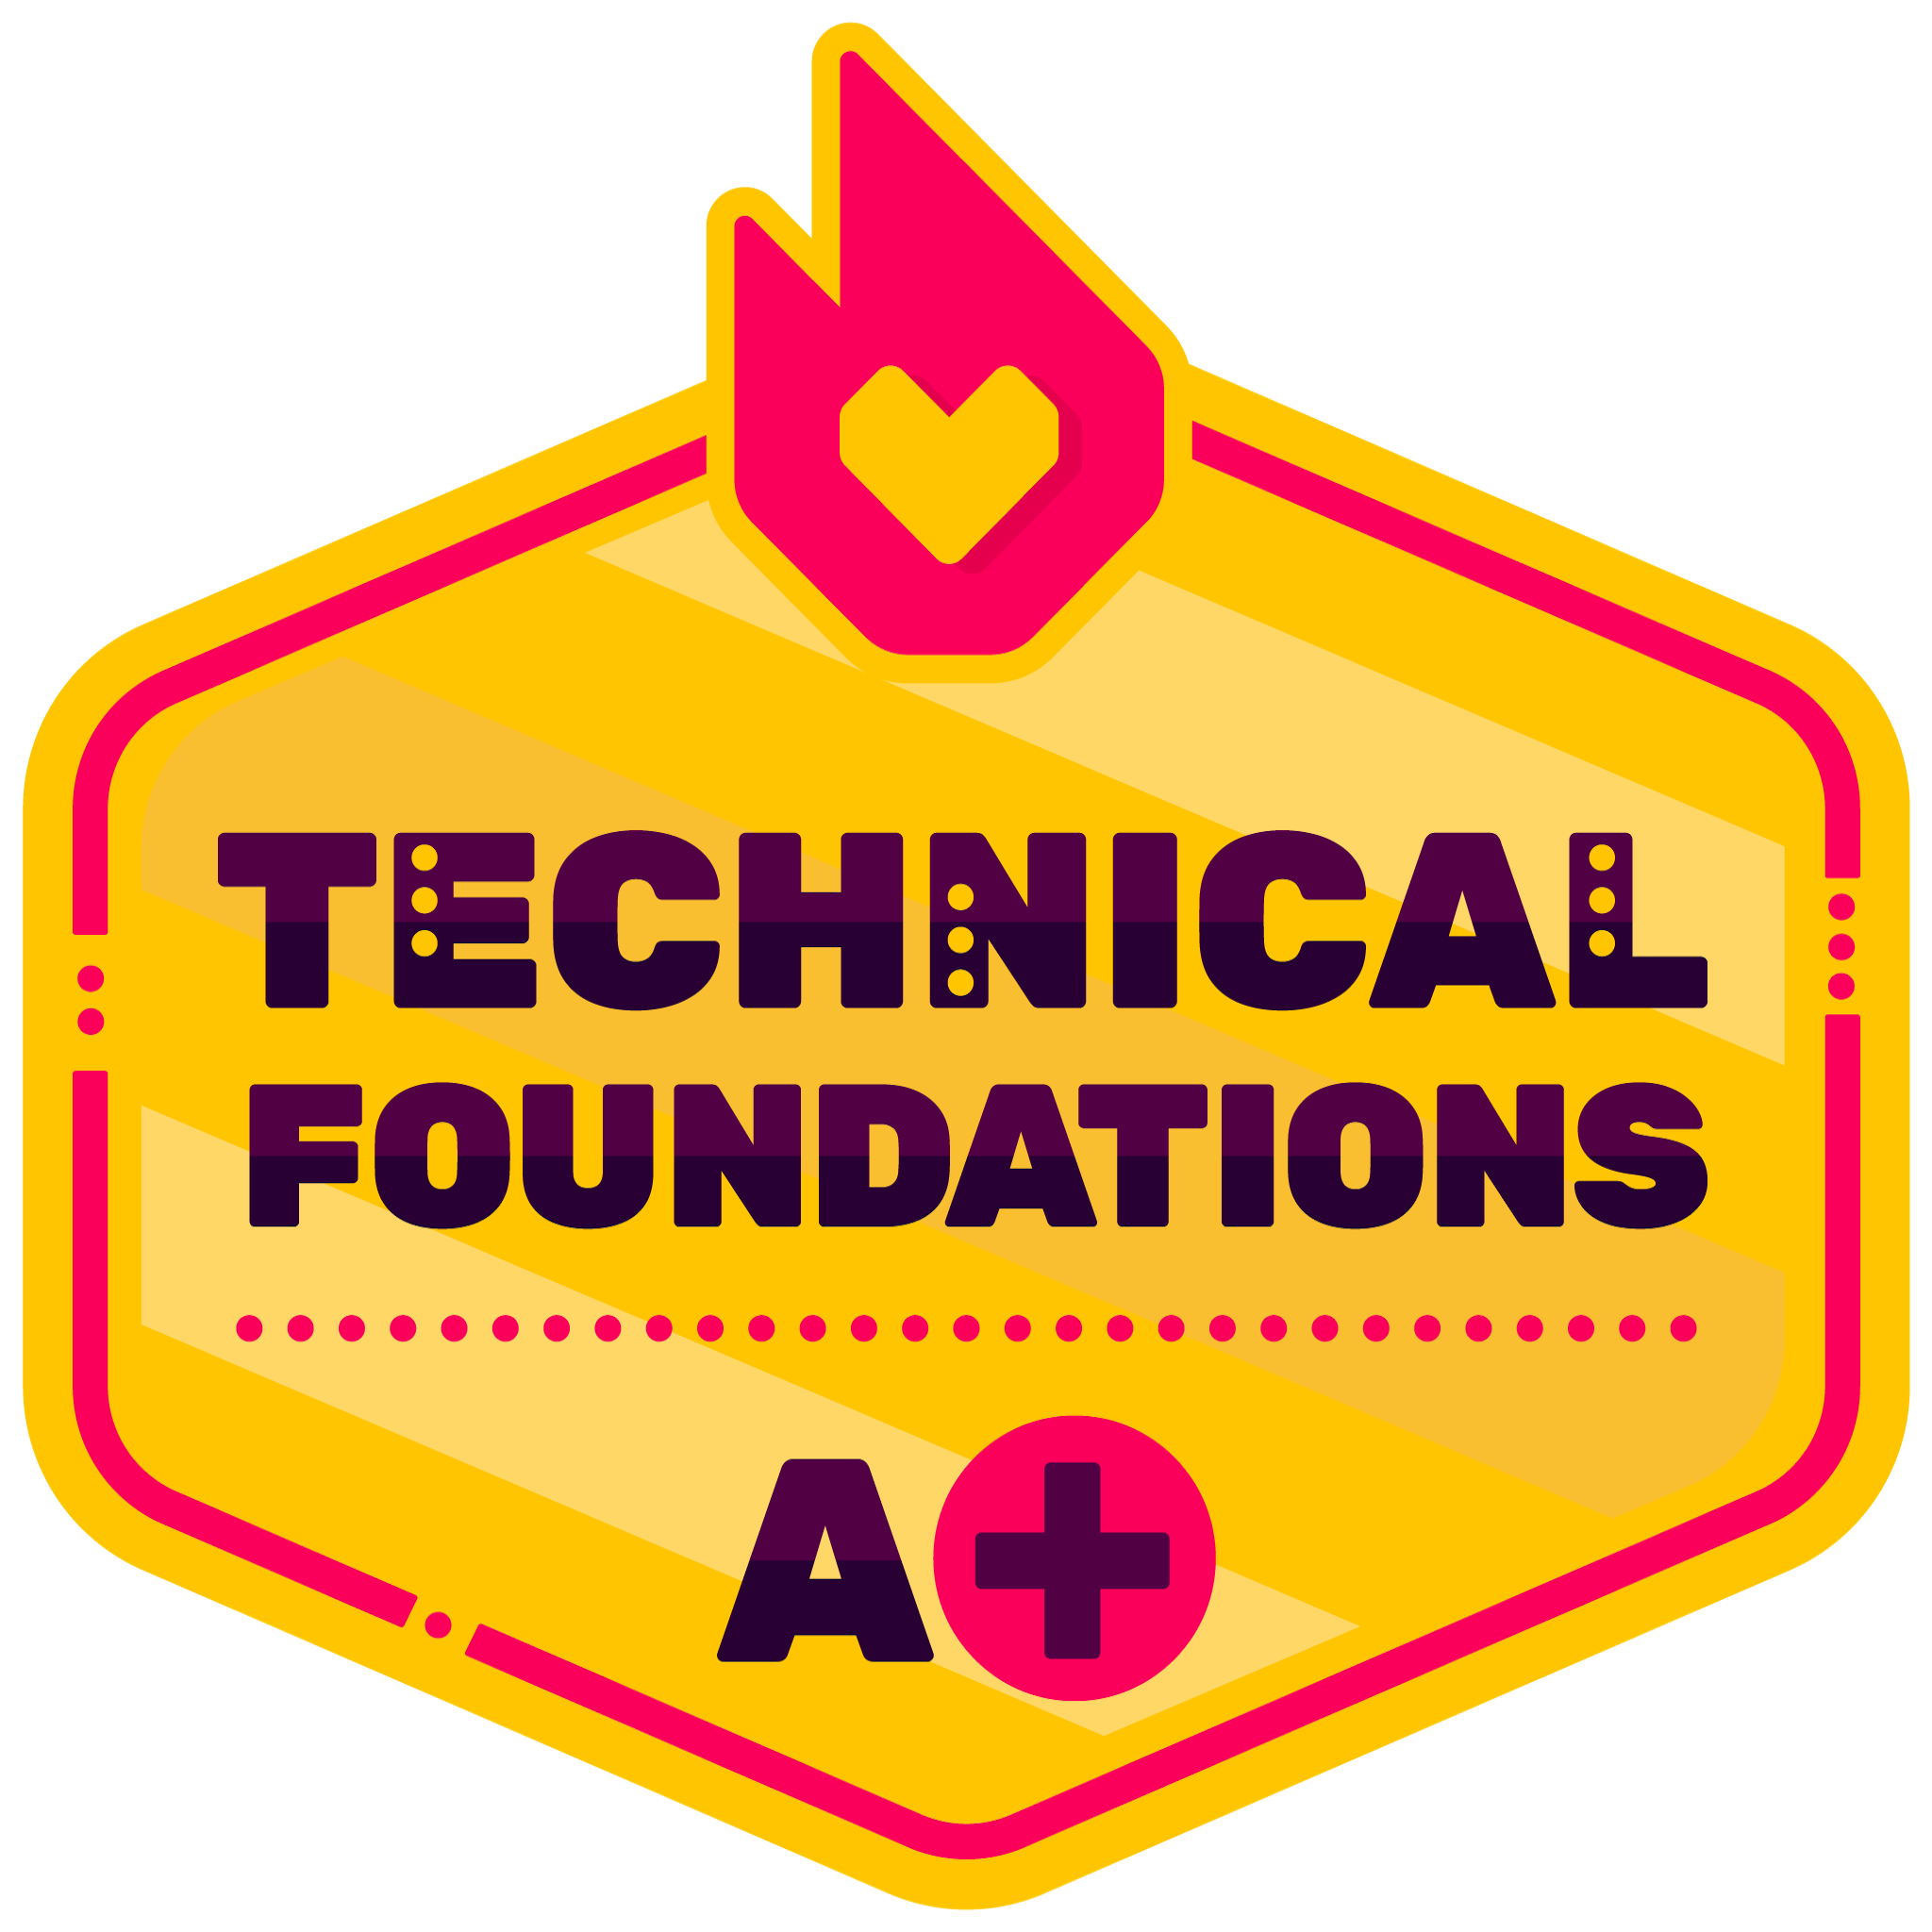 Technical-foundations.png